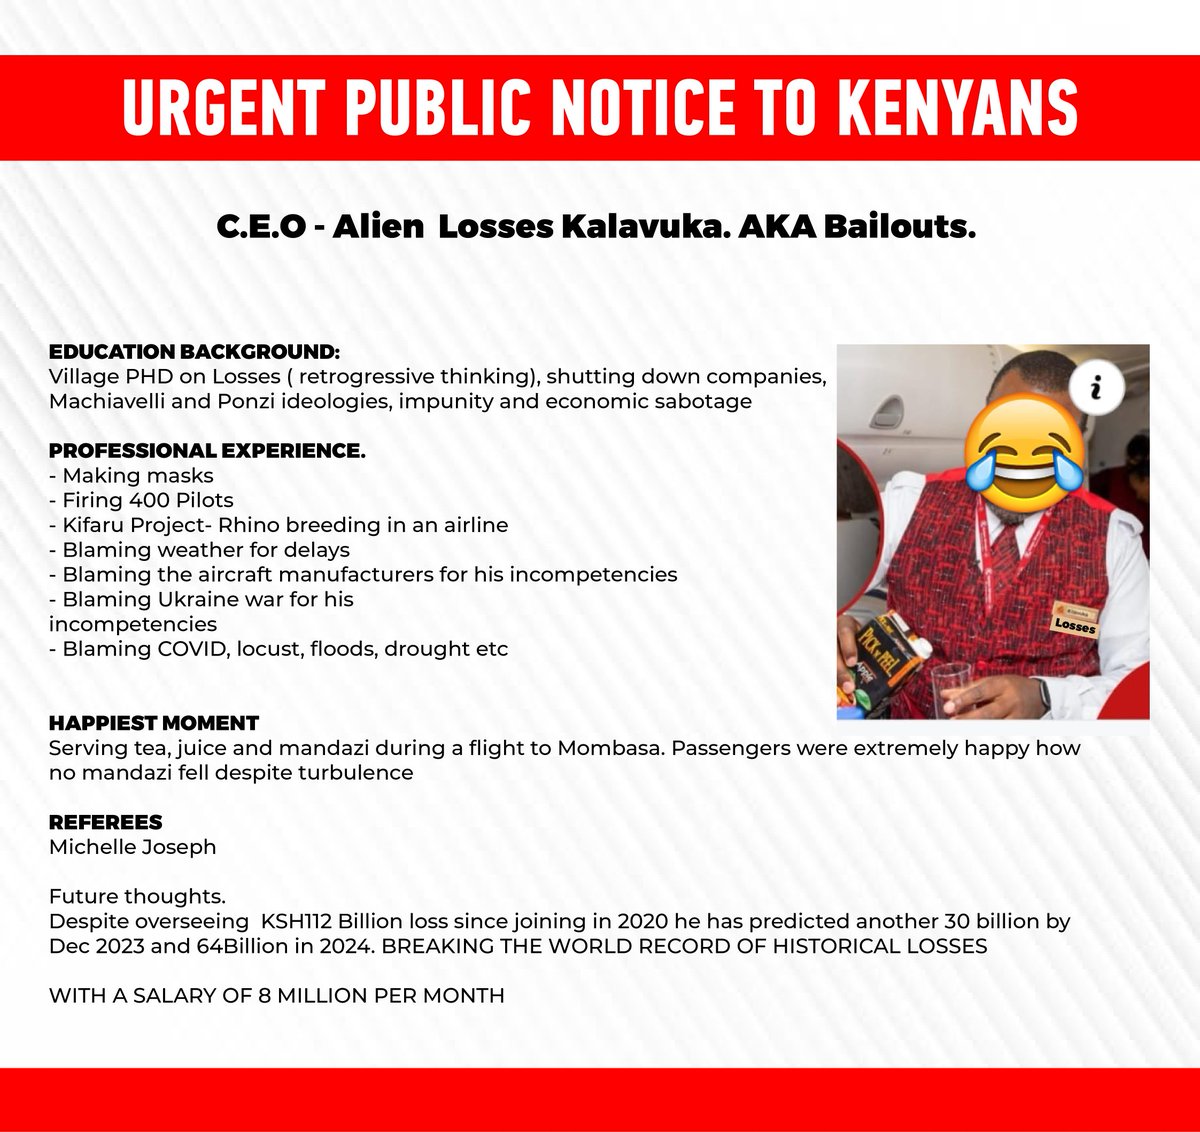 8 million per month ? Halafu a whole CEO is making losses amounting to 30B ,si heri wachukue mtoto wa Class 1 wampee kazi ,that cow should go home ,we request the office of registration to change his names to LOSSES KAVALUKU , that cow must go 

#OverhaulKQ